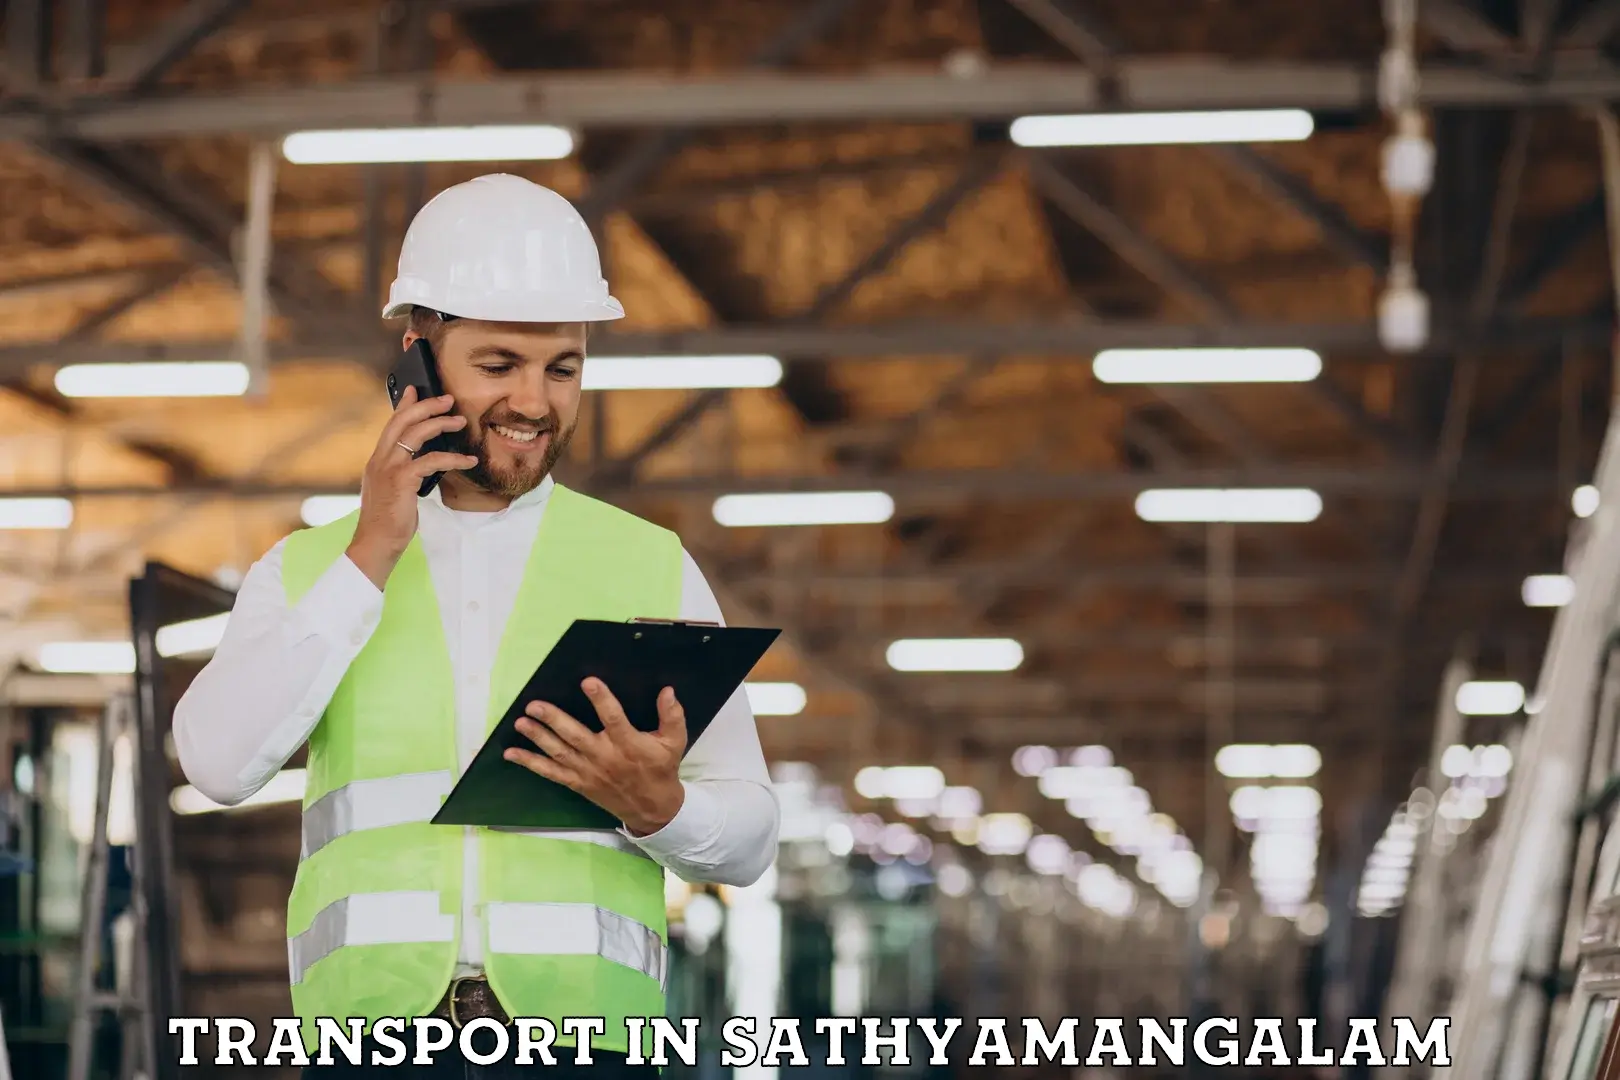 Nationwide transport services in Sathyamangalam